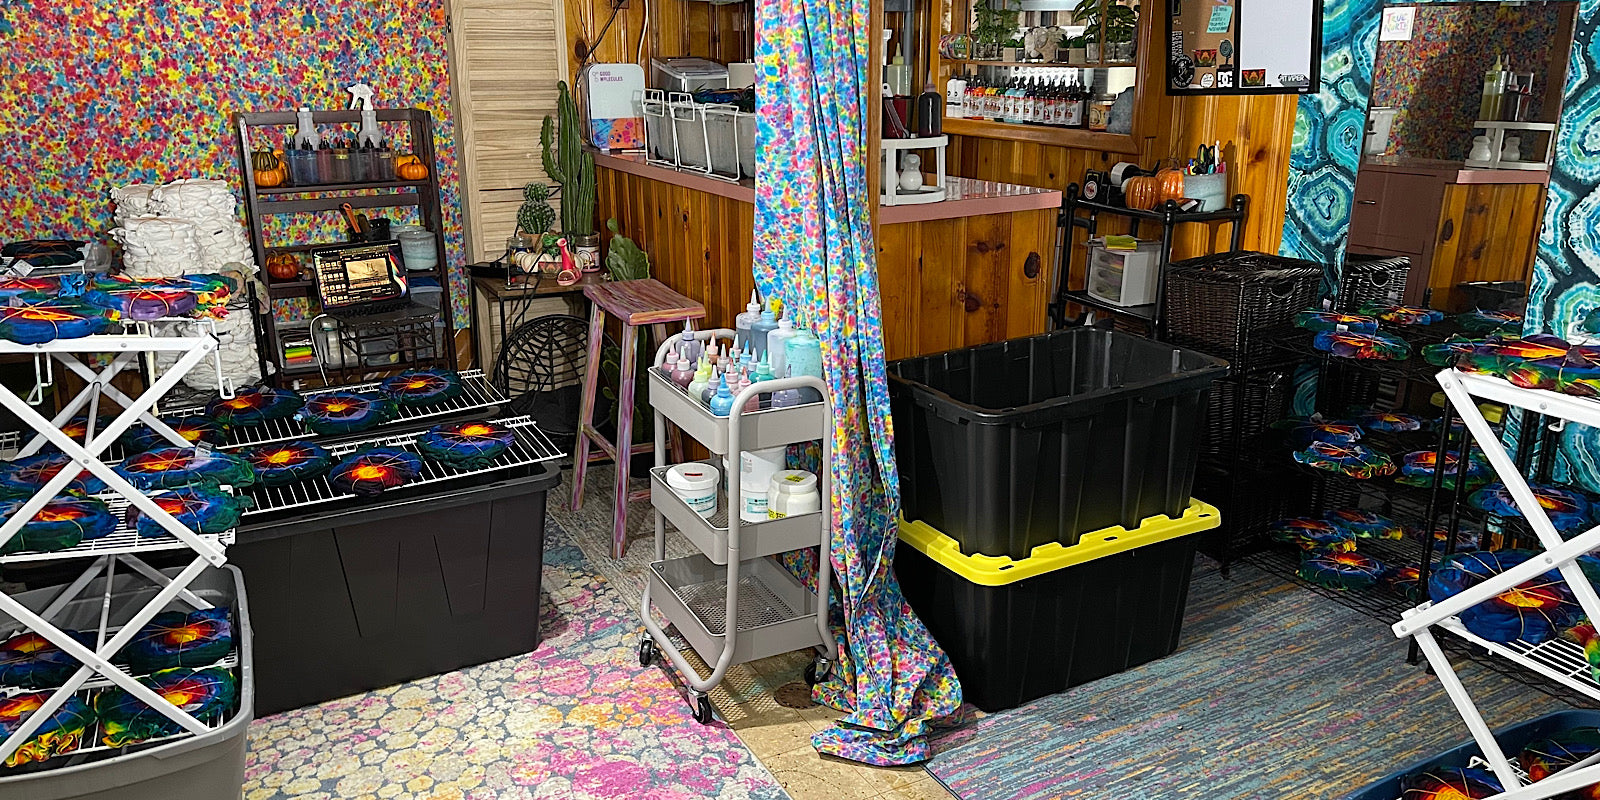 Another view of the tie dye bar & studio while a large custom order for over 200 rainbow tie dye shirts is in progress